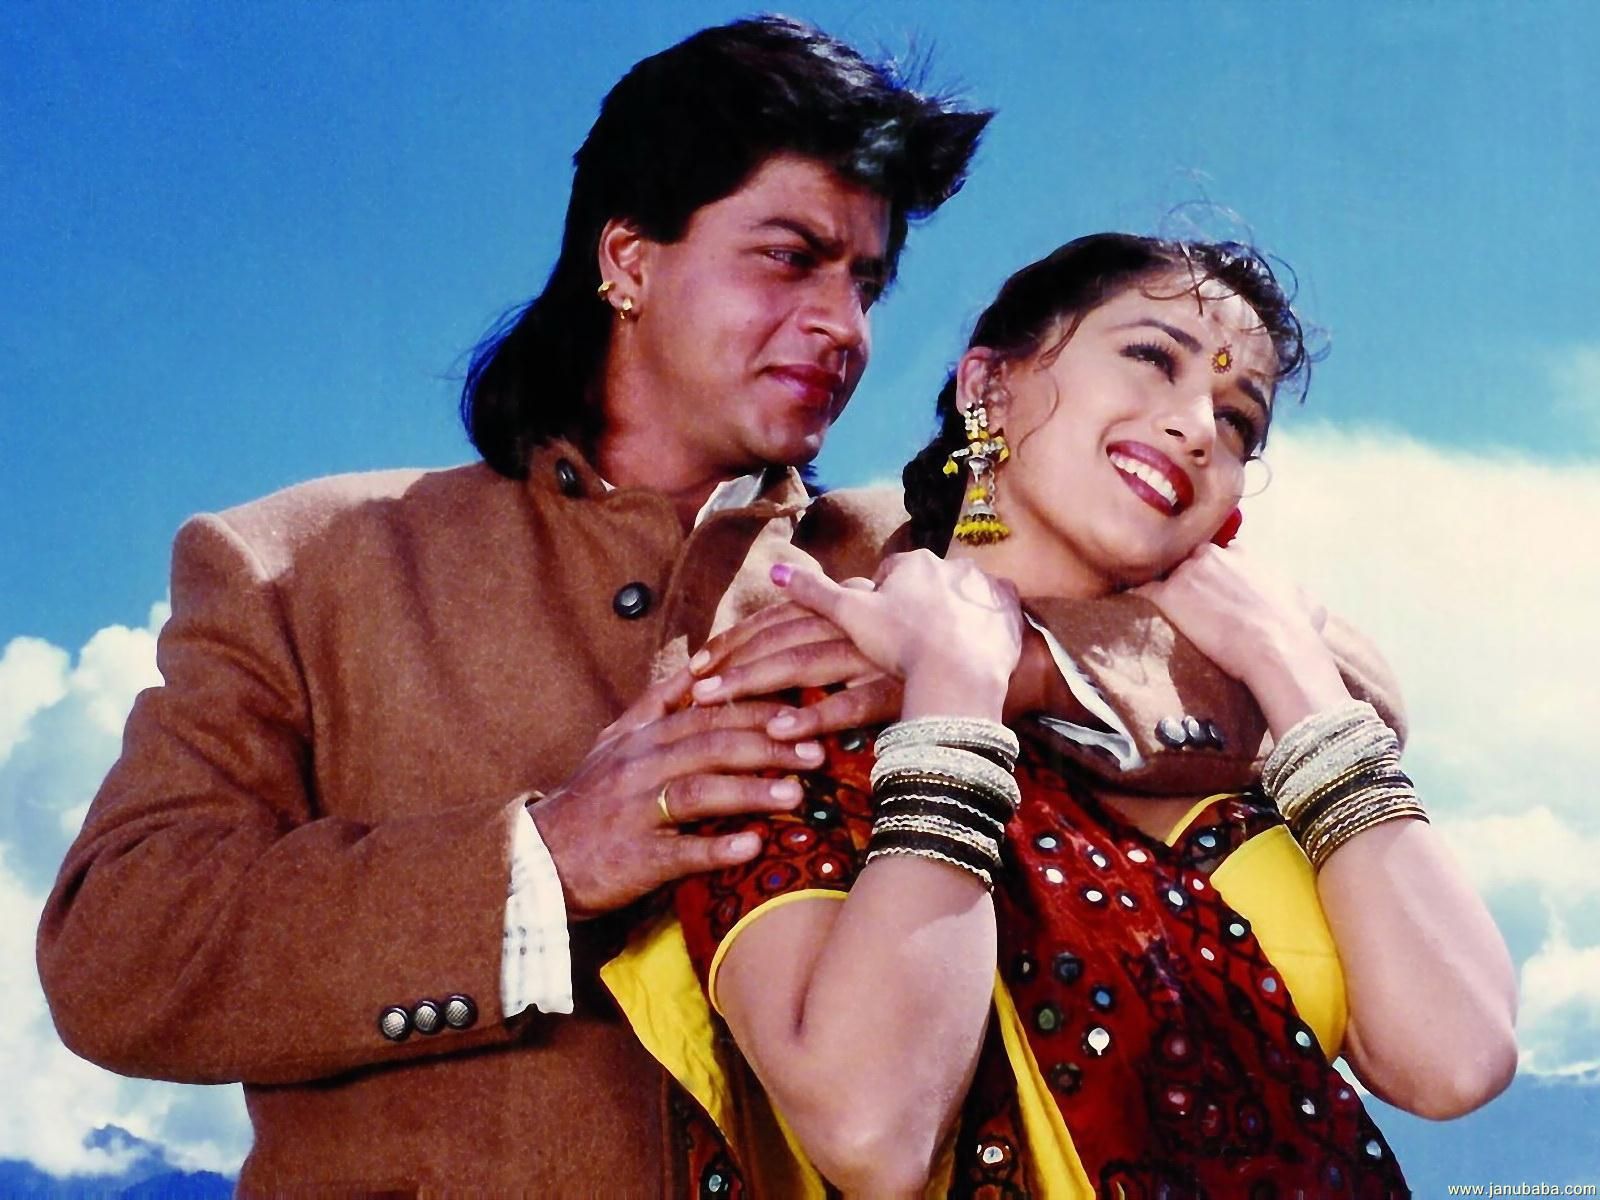 Madhuri Dixit Reveals Why She Wanted To Do A Romantic Film With Shah Rukh Khan After Koyla